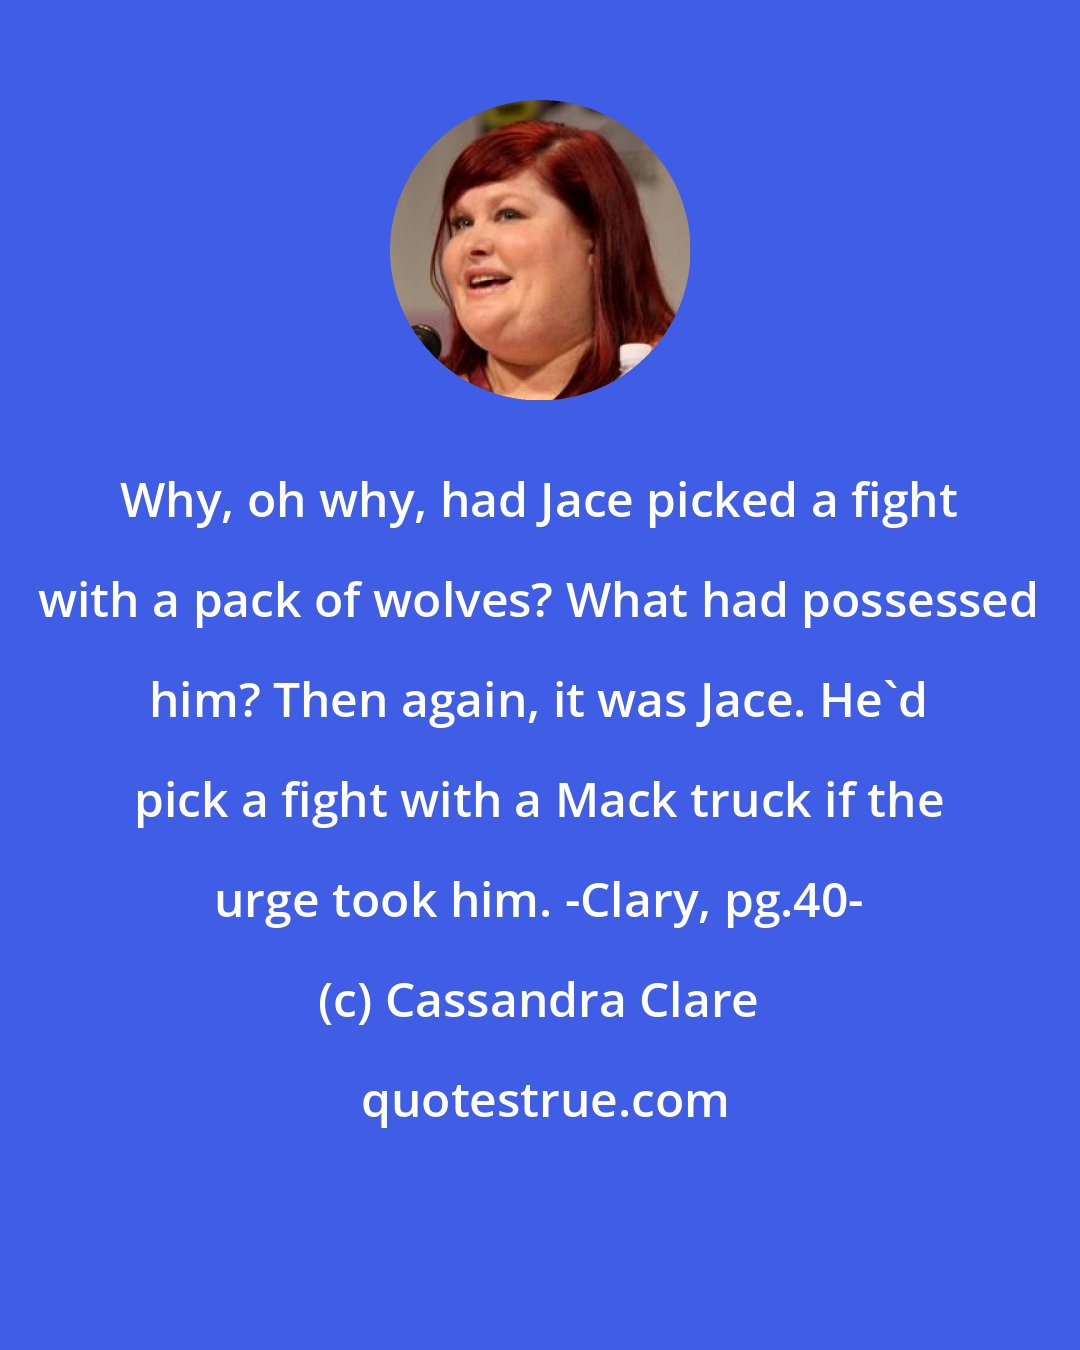 Cassandra Clare: Why, oh why, had Jace picked a fight with a pack of wolves? What had possessed him? Then again, it was Jace. He'd pick a fight with a Mack truck if the urge took him. -Clary, pg.40-